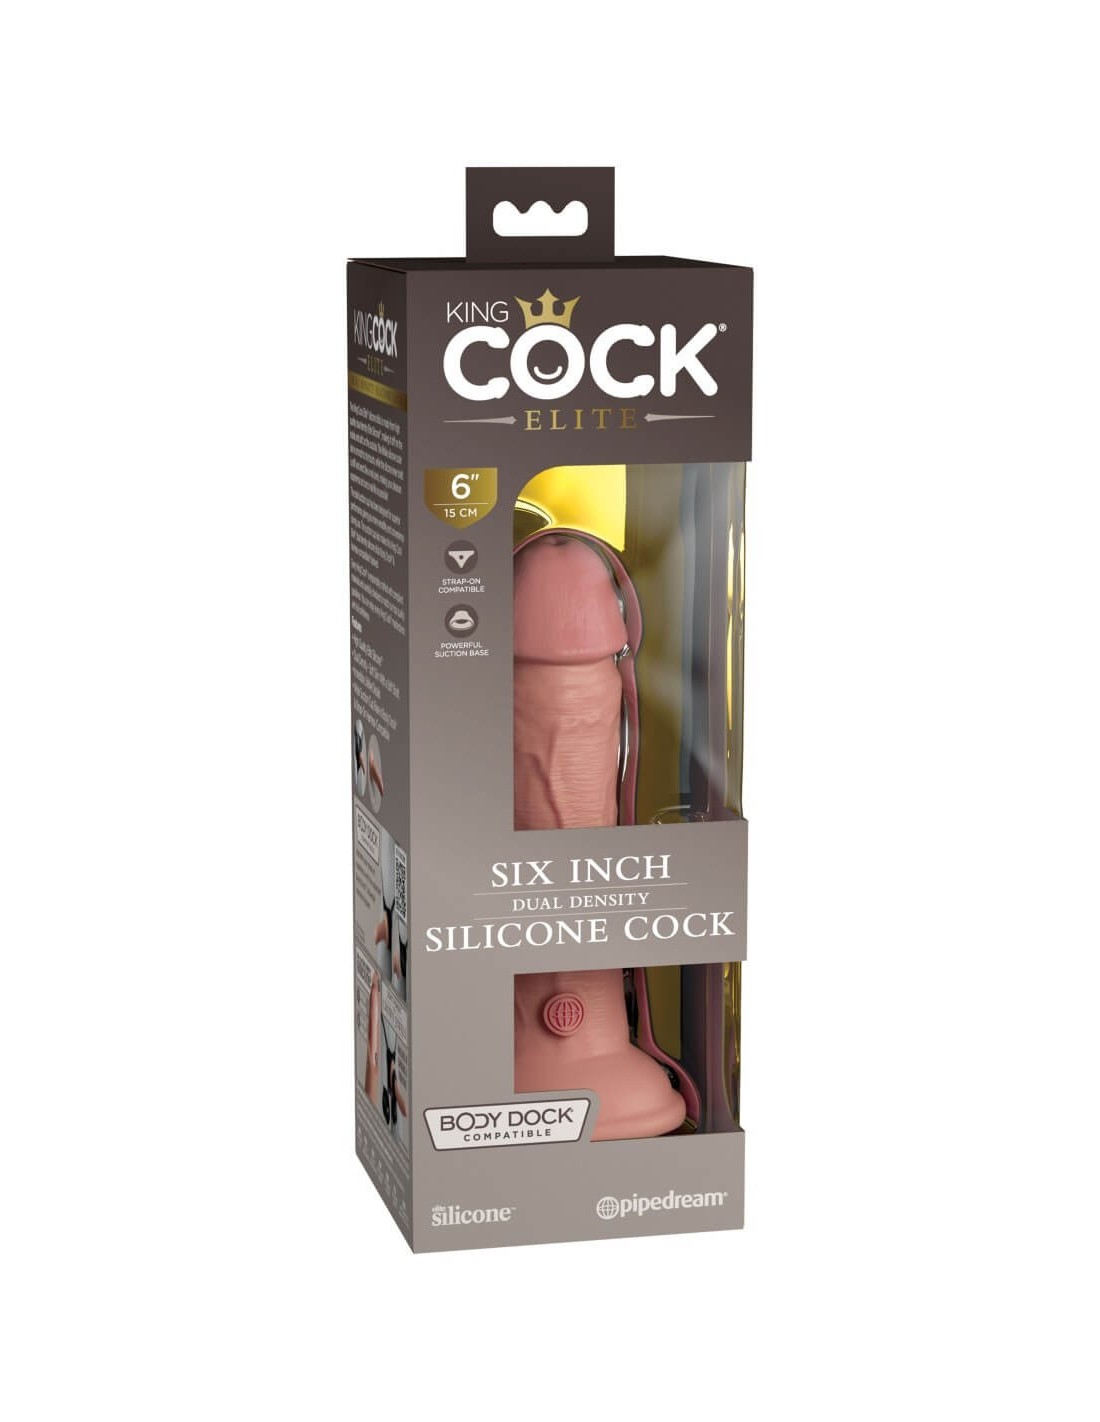 Inch cock 6 Is 6.5